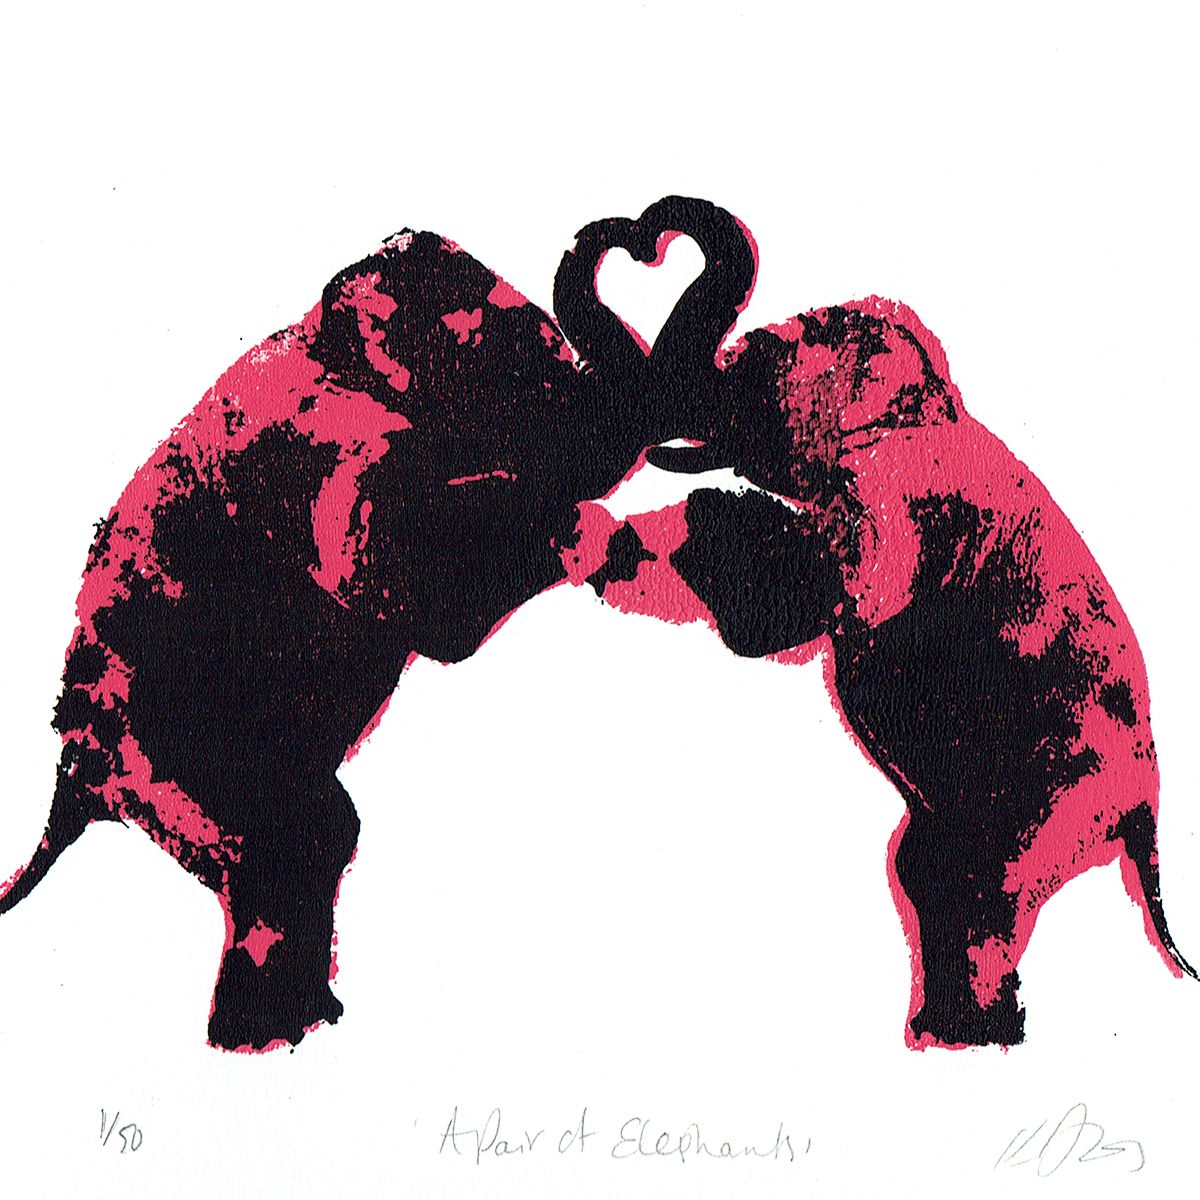 A Pair of Elephants by Katie Edwards